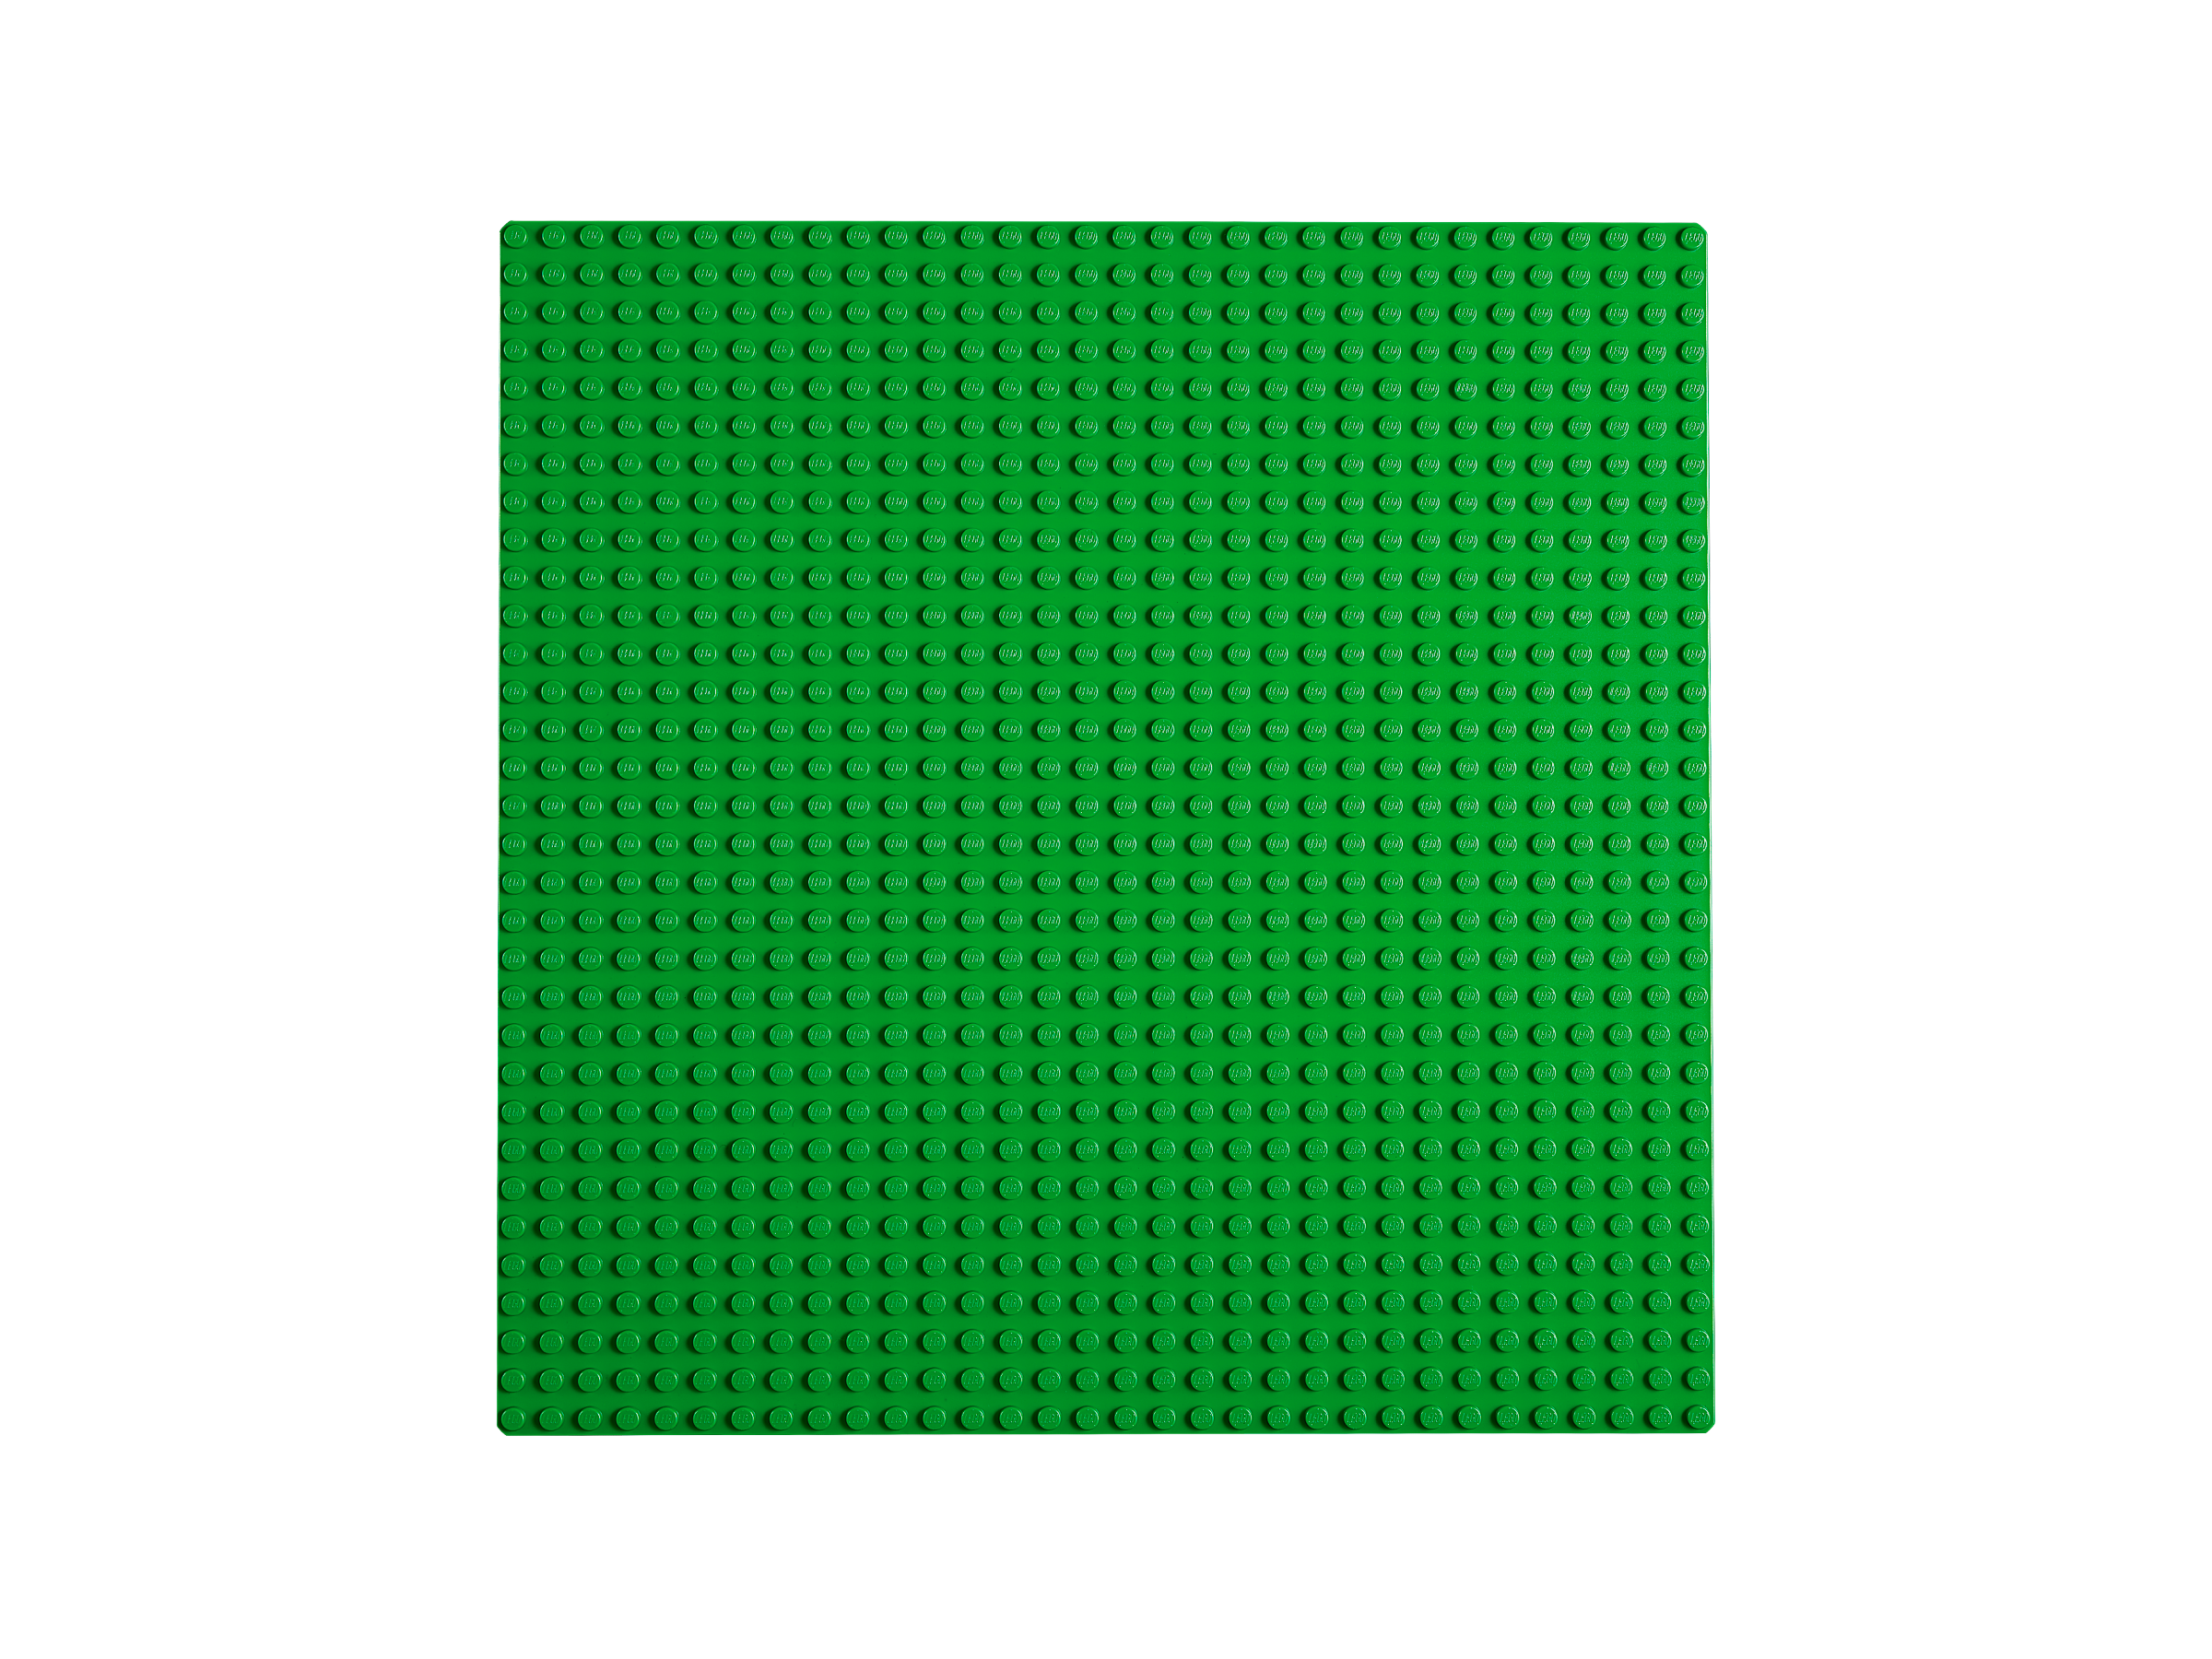 ▻ New in LEGO Classic 2022: reference change for LEGO base plates